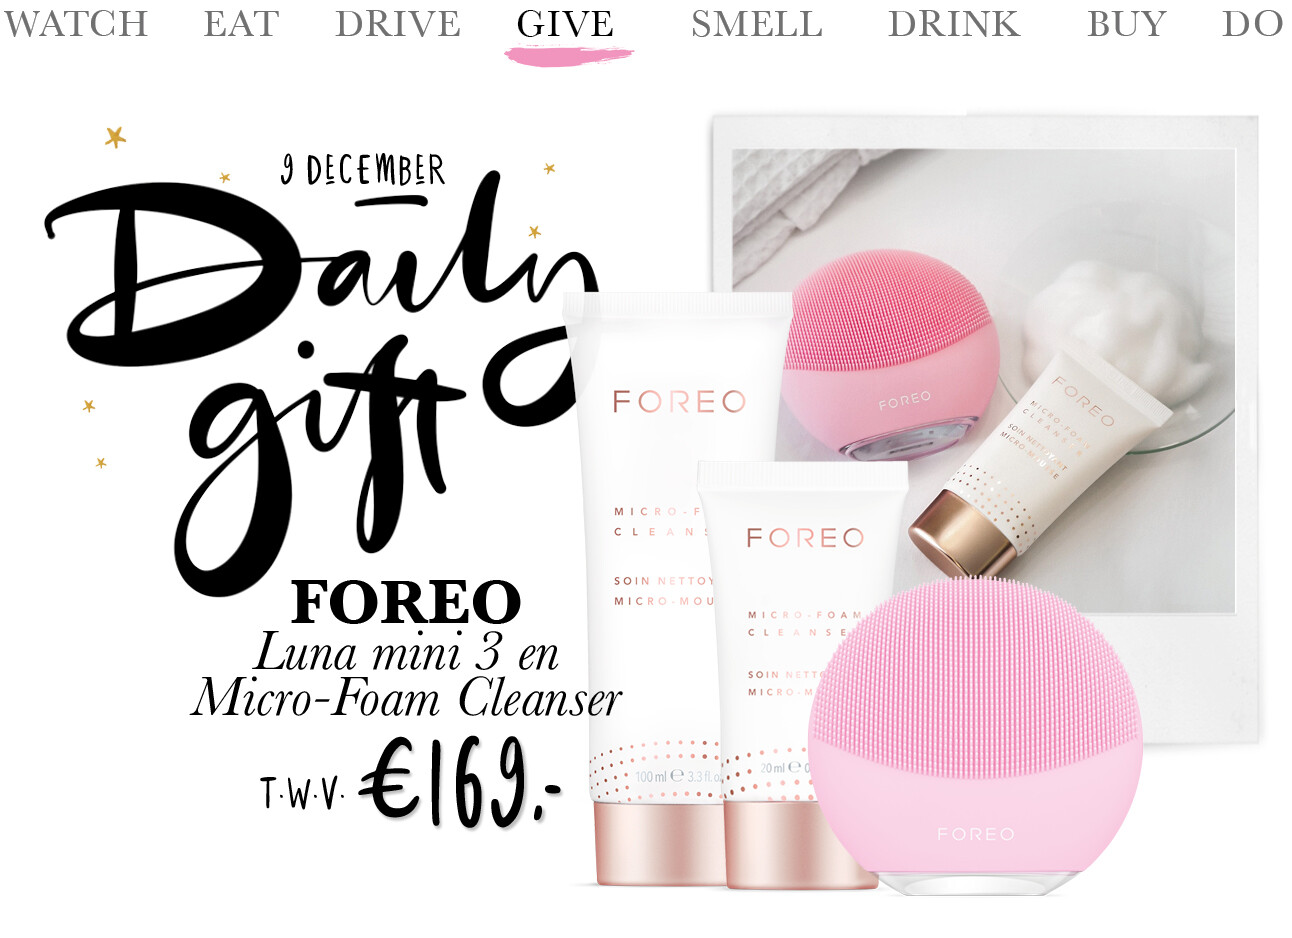 Today we give: een Foreo Luna mini 3 inclusief Micro-Foam Cleanser